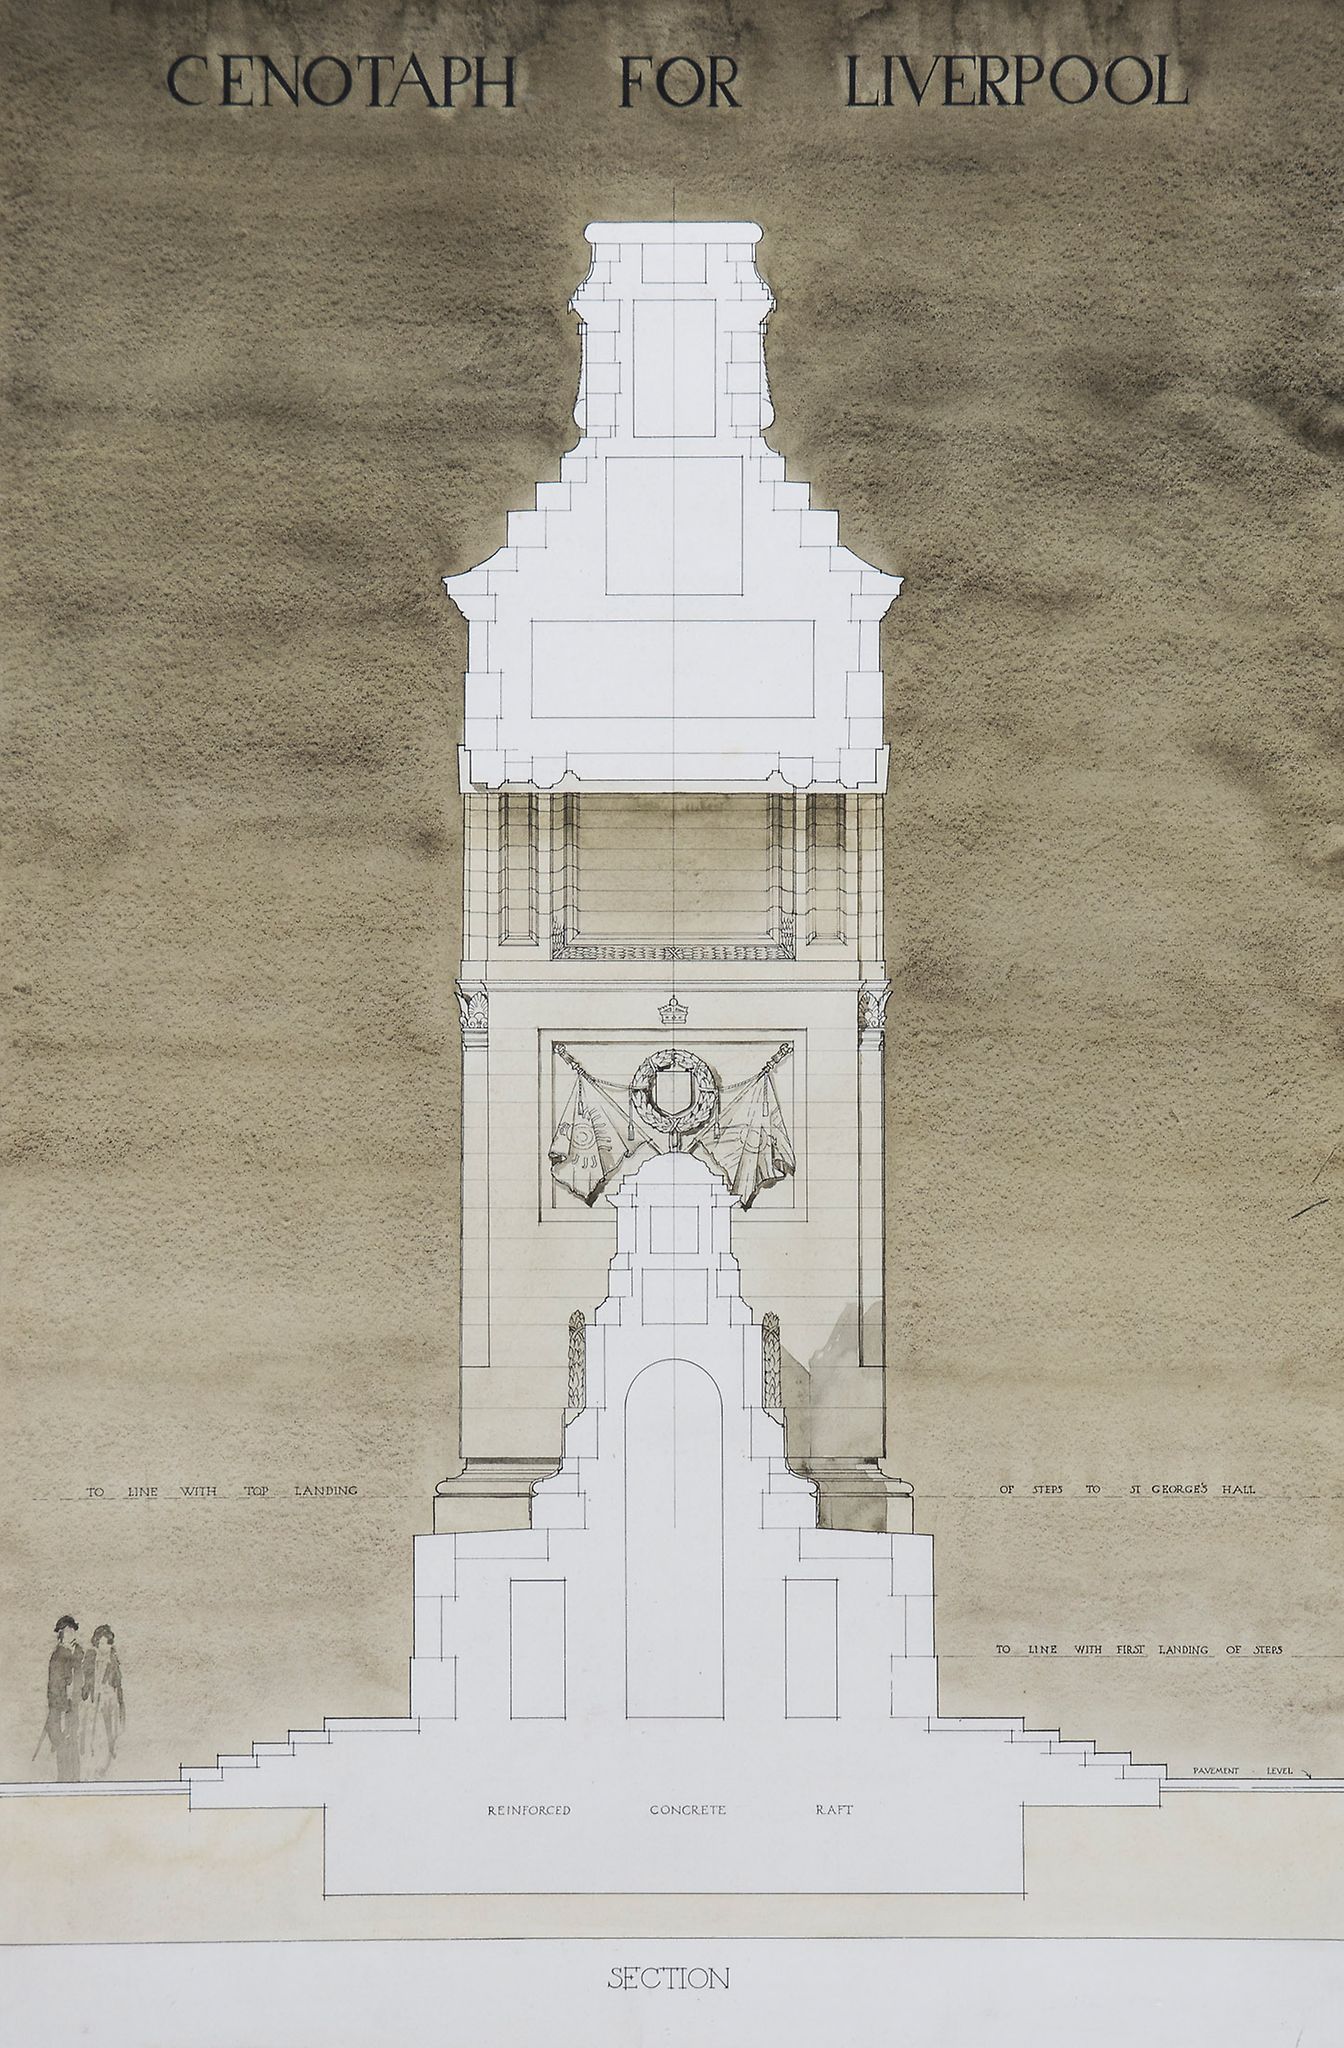 English School - Competition design for the Liverpool Cenotaph,  elevation and sectional drawing for